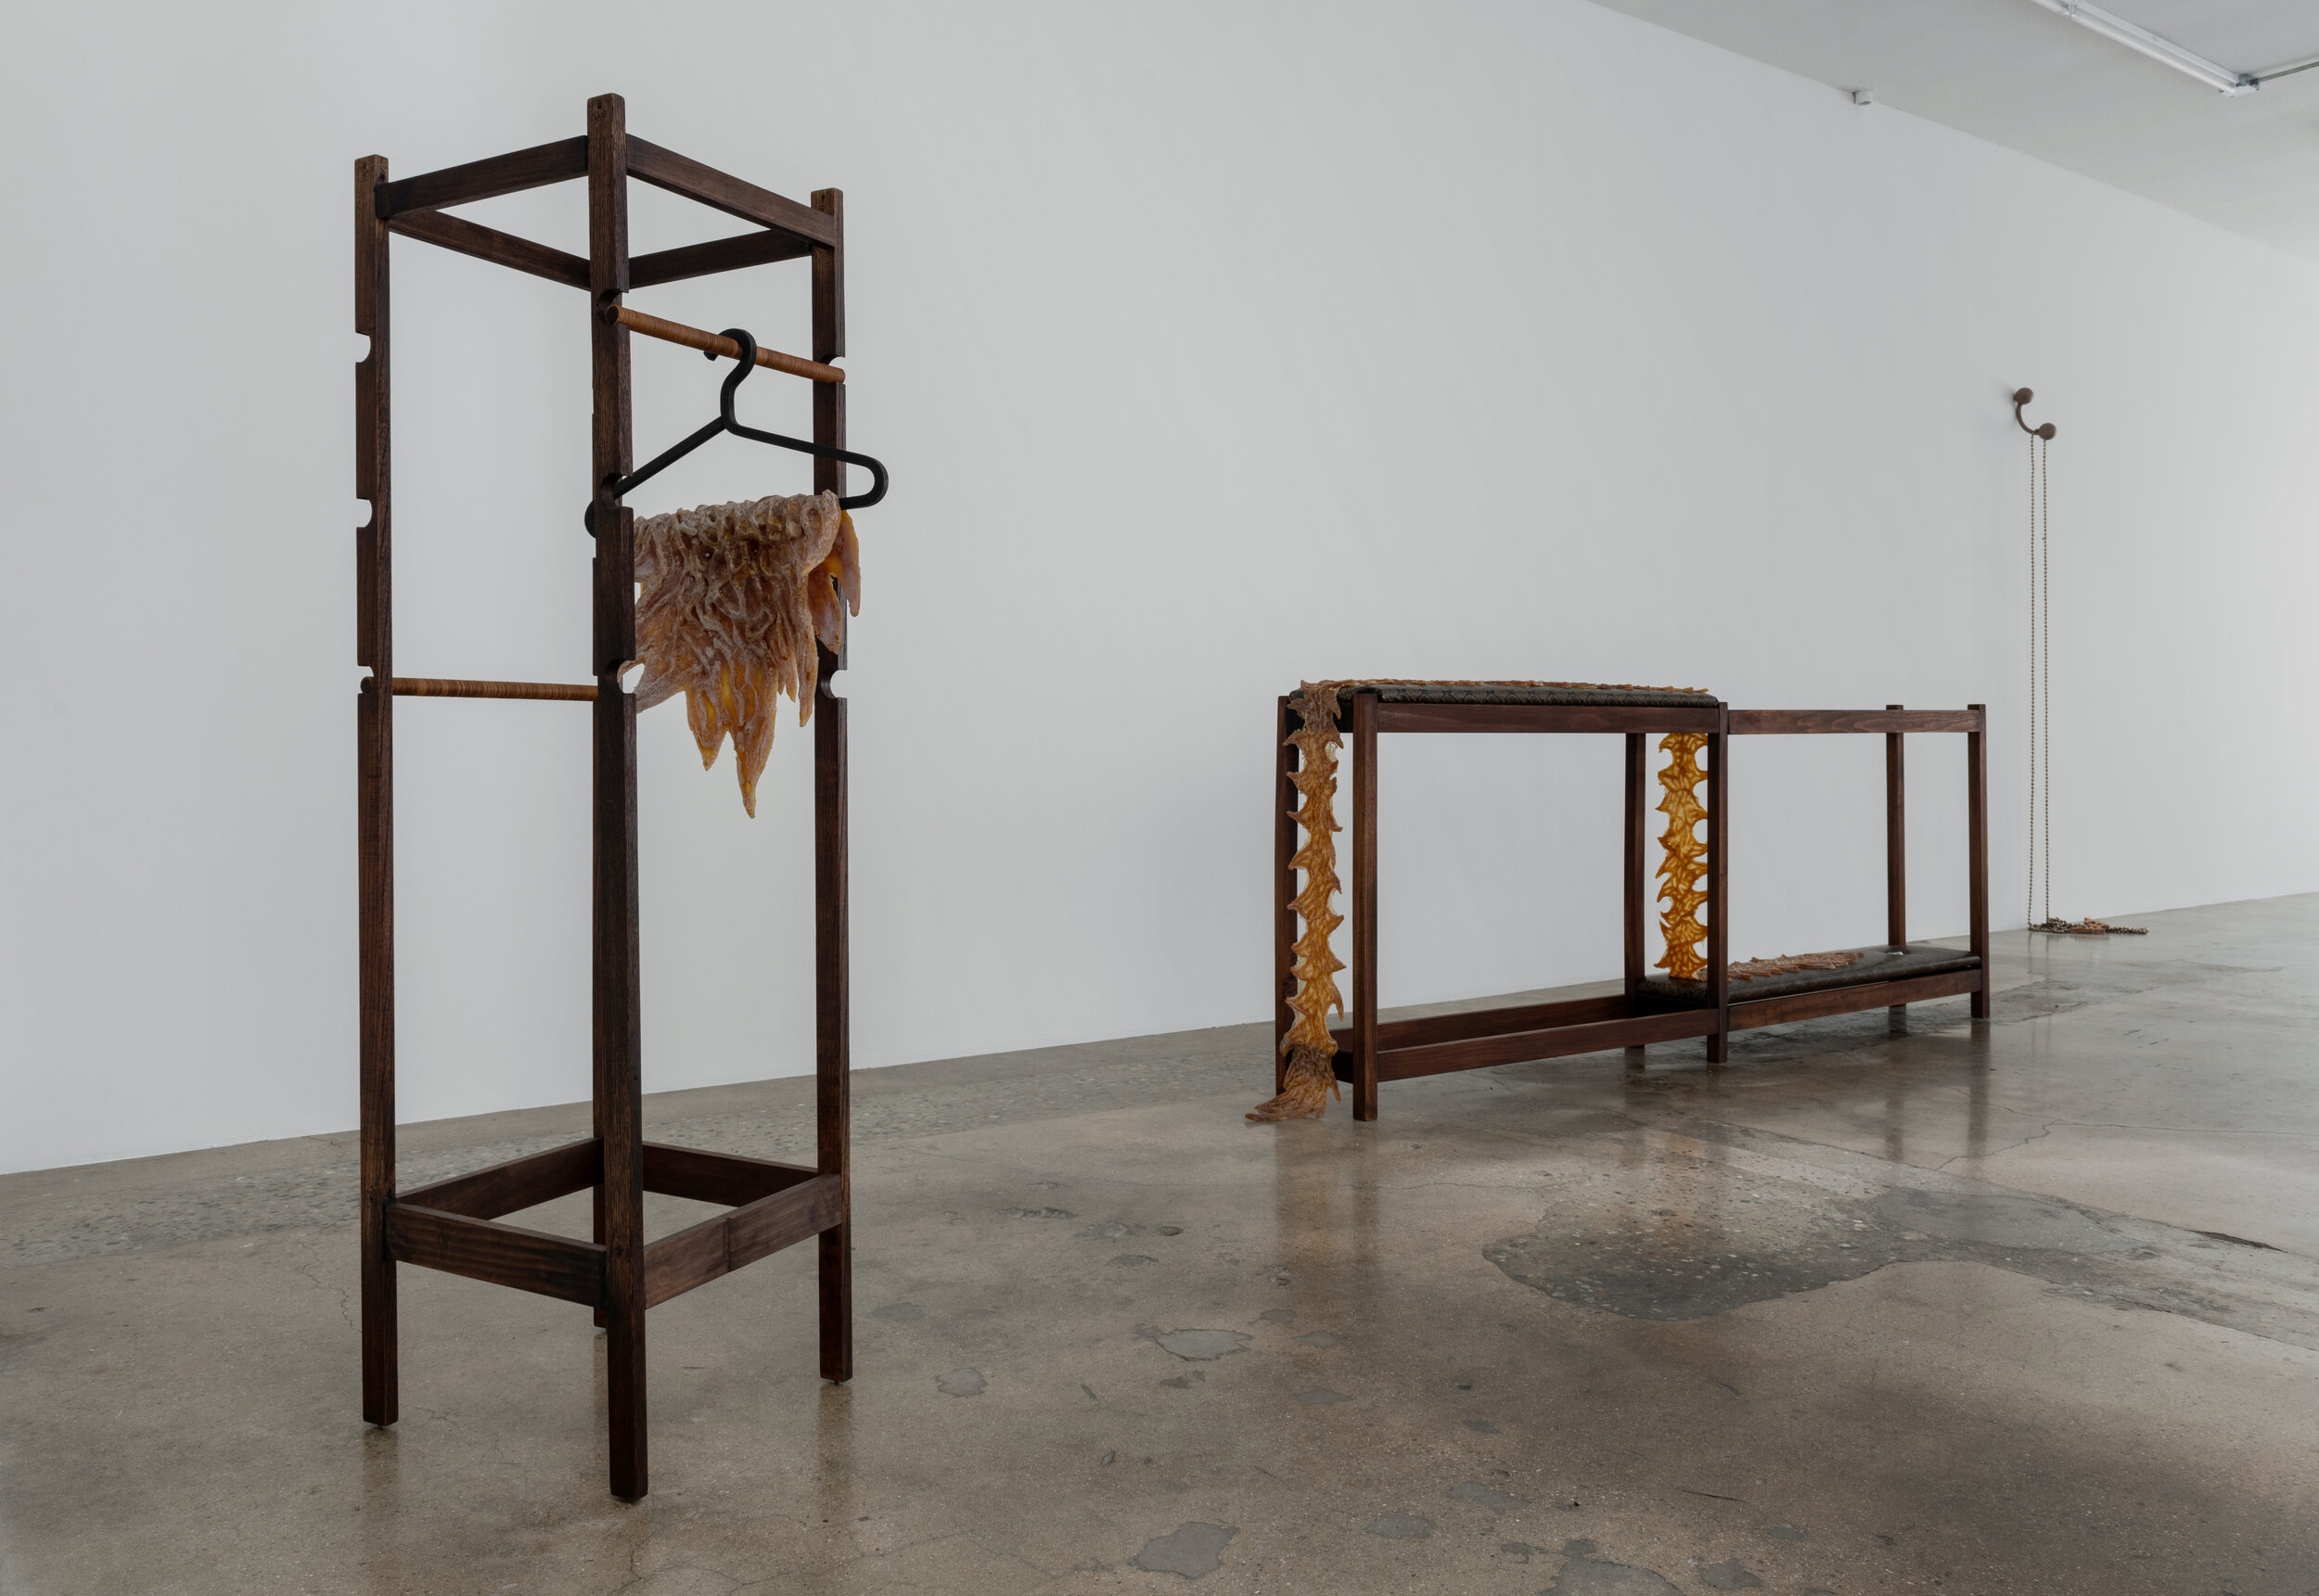  Installation view of Sessa Englund:  Fool’s Errand   May 16 - July 4 2021  Photo by Ruben Diaz   Link to press release  